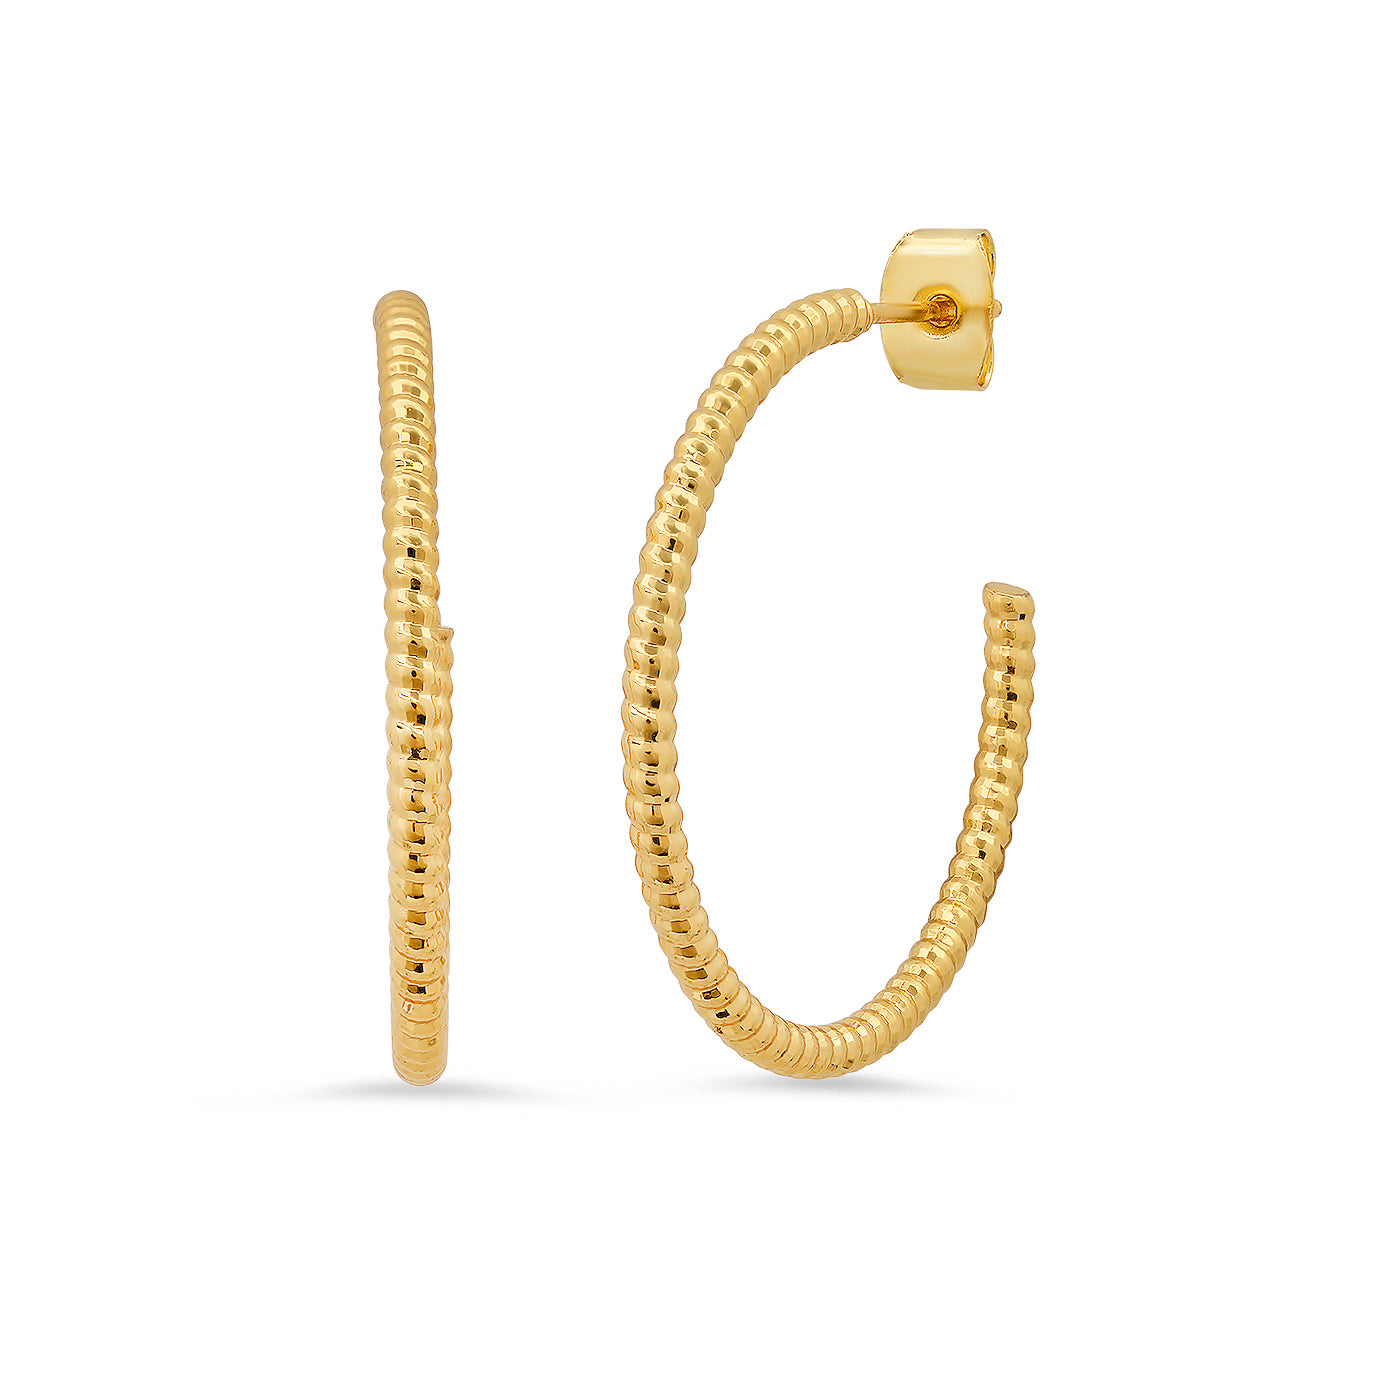 Tightly twisted TAI gold hoops